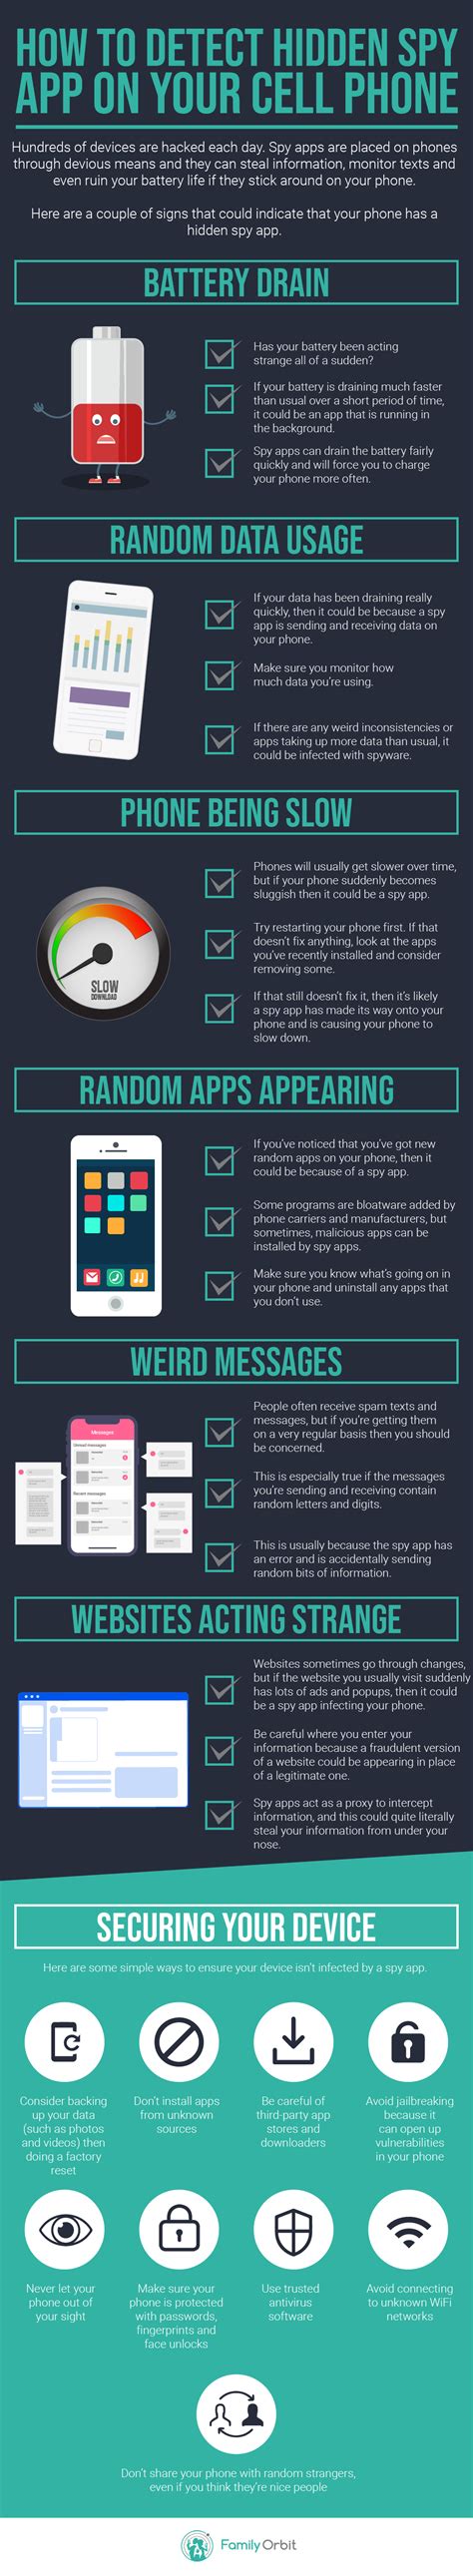 how to detect hidden spy app on your cell phone [infographic]